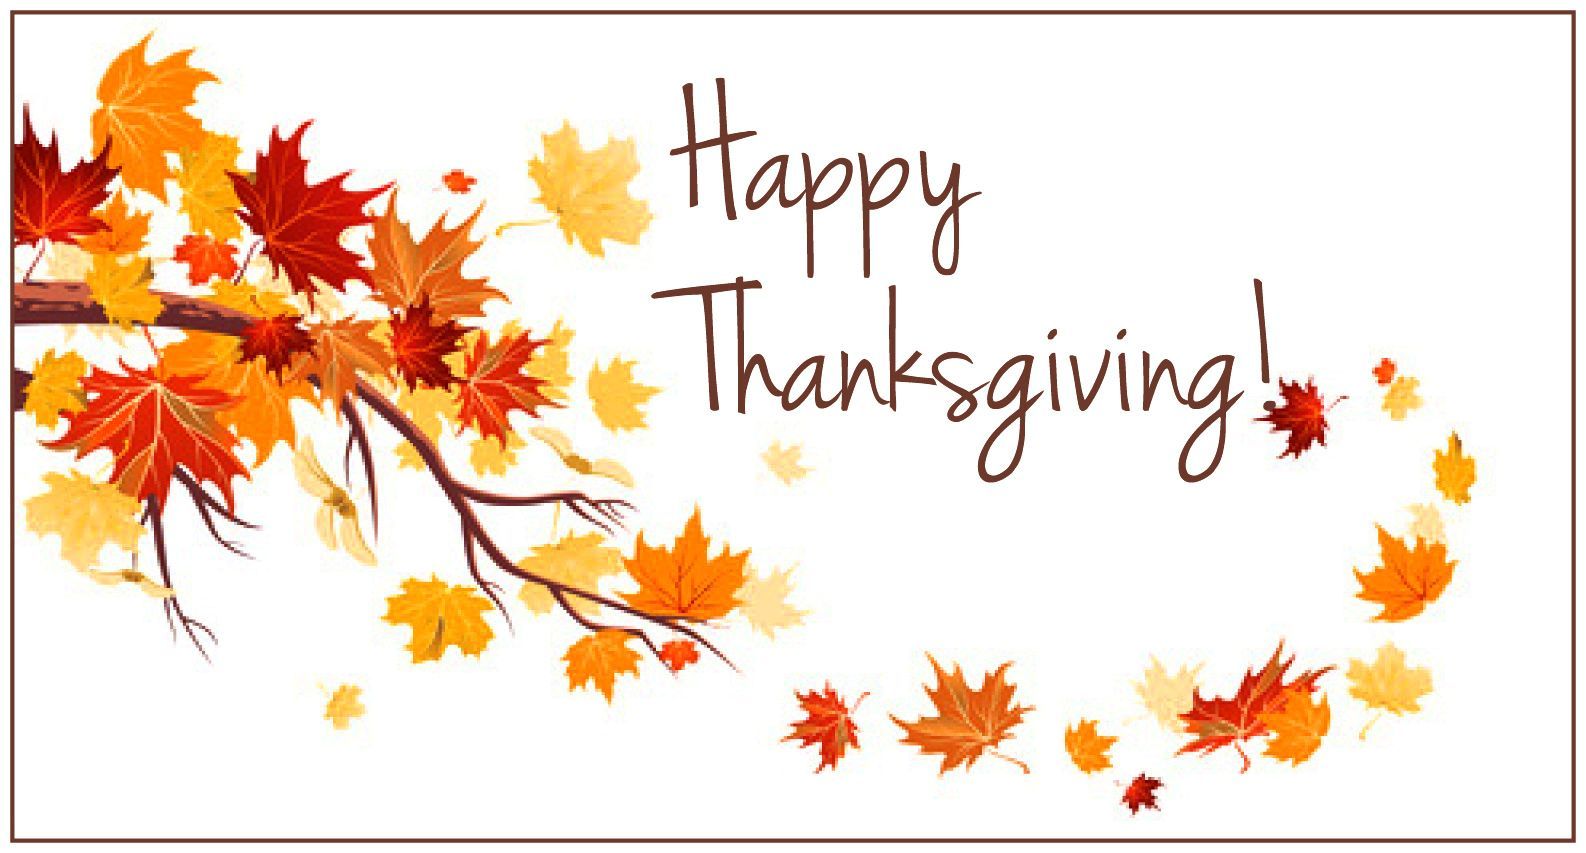 Happy thanksgiving day 2016 clip arts download free image, wallpaper